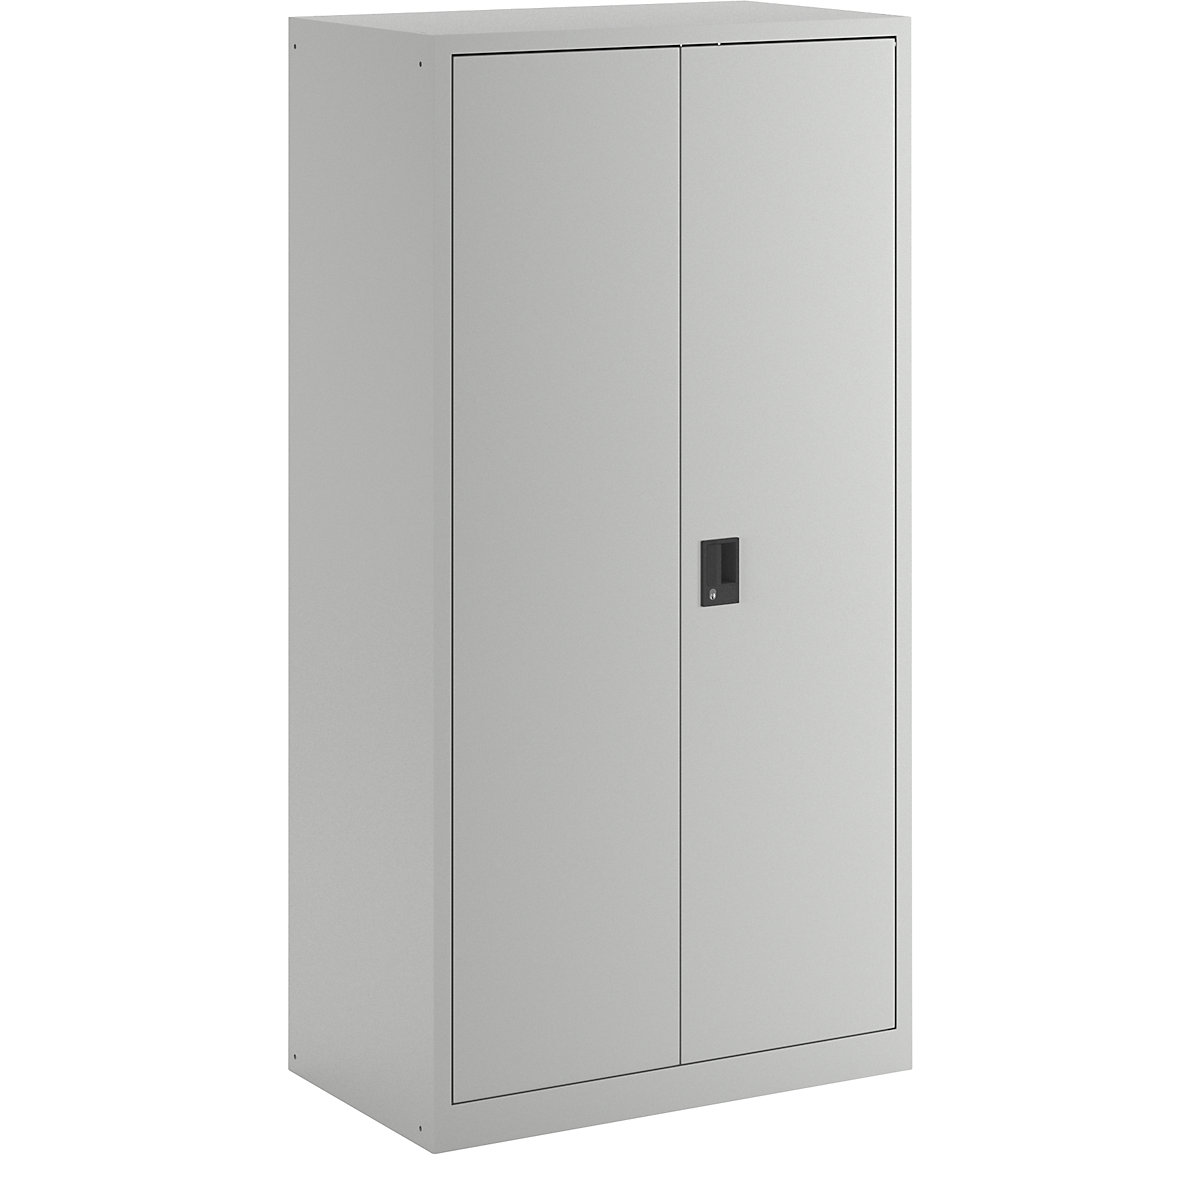 Battery charging cabinet – LISTA, 3 shelves, 2 drawers, solid panel doors, grey-8